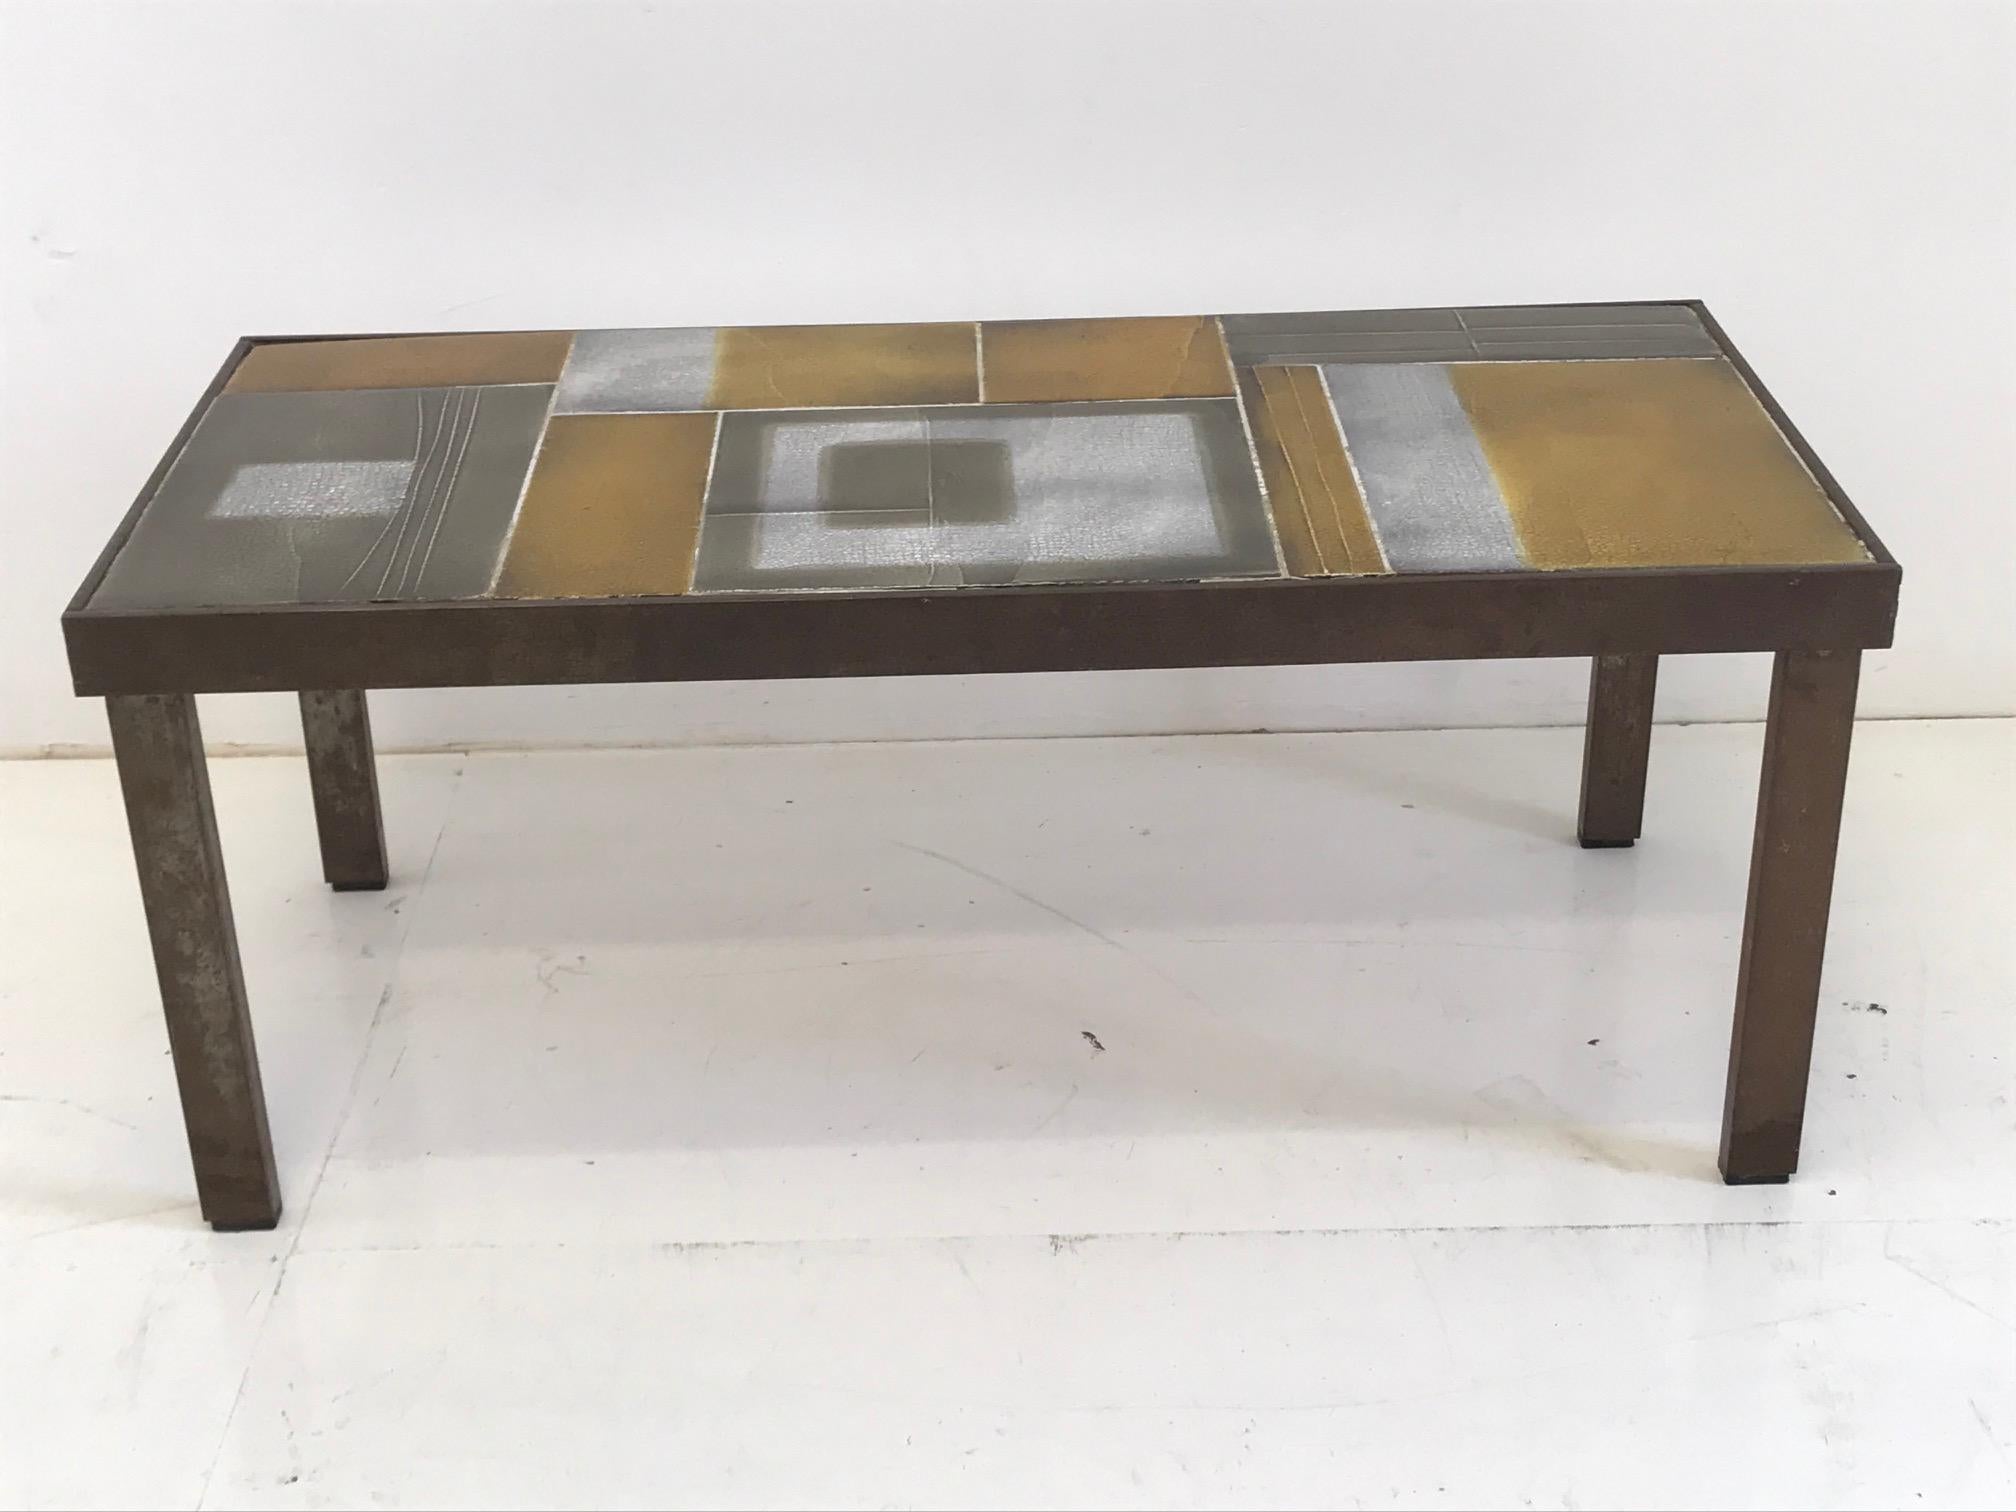 Coffee table, tabletop with geometric decoration of lava tiles glazed in shiny shades of brown, amber, white and warm grey, with various glaze effects, on metal frame and legs. Mid-20th century model designed and signed by the French artist Roger